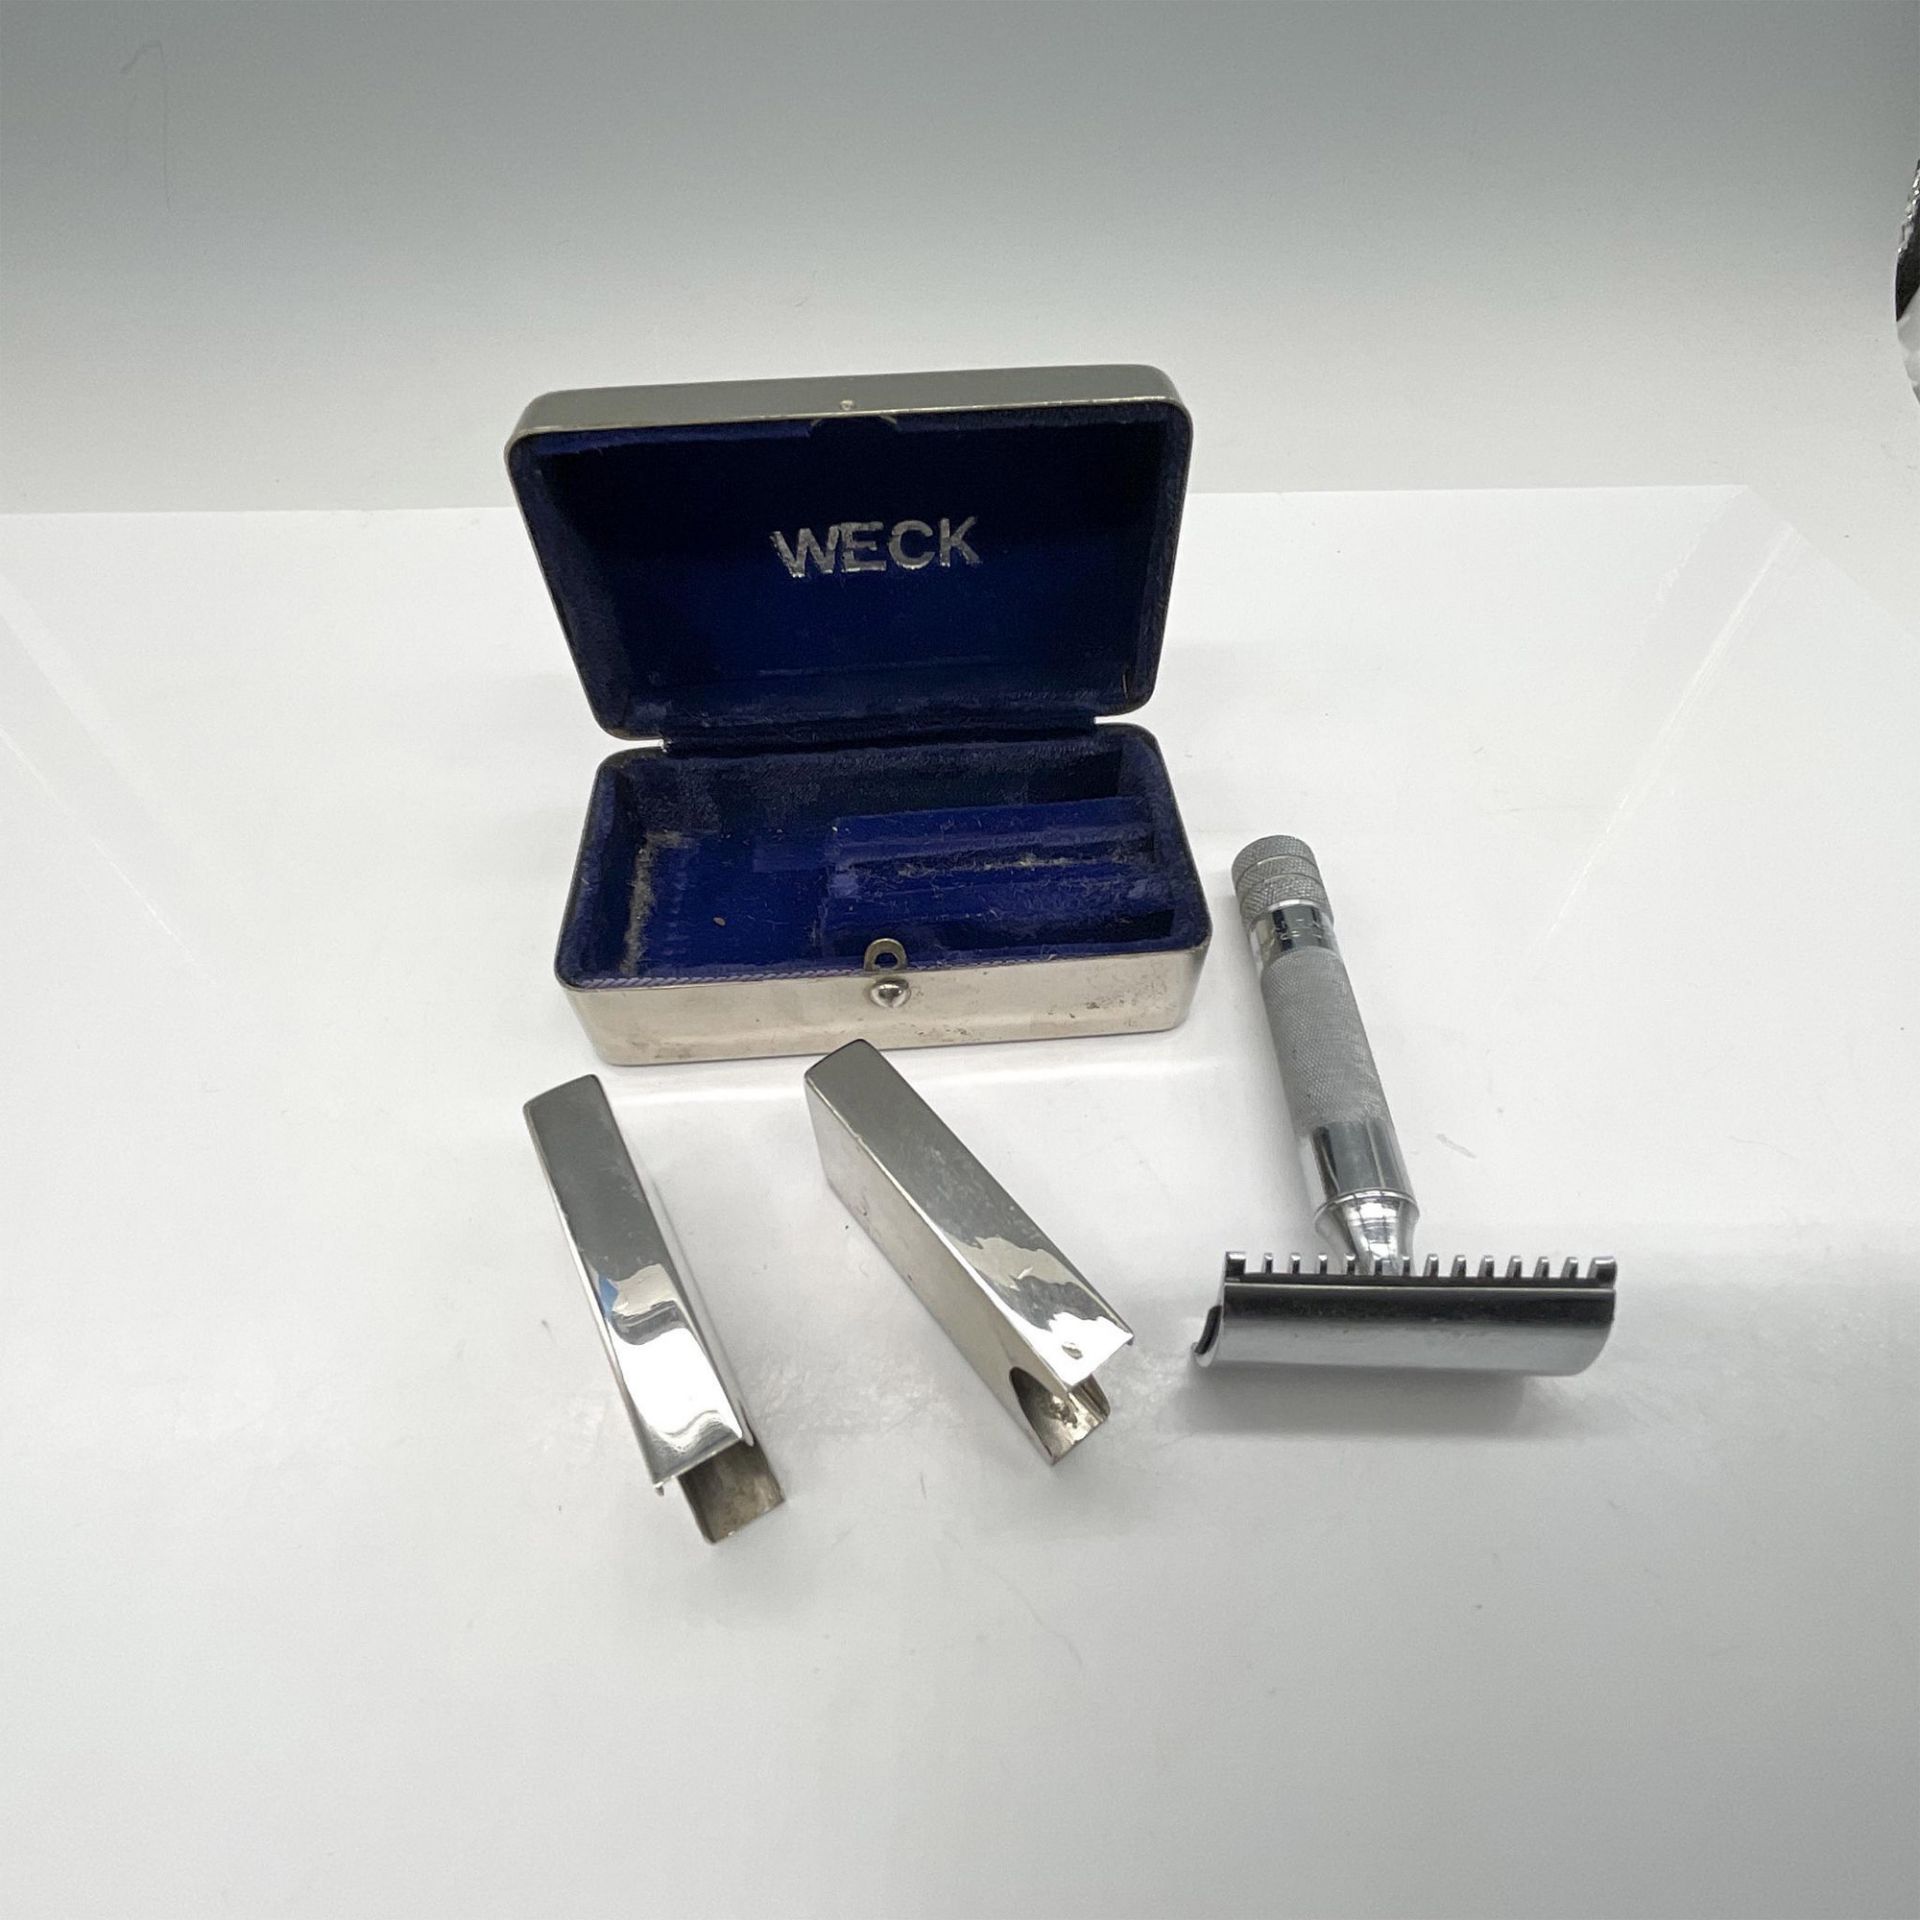 Vintage Voss Cutlery Germany Safety Razor in Case - Image 2 of 3